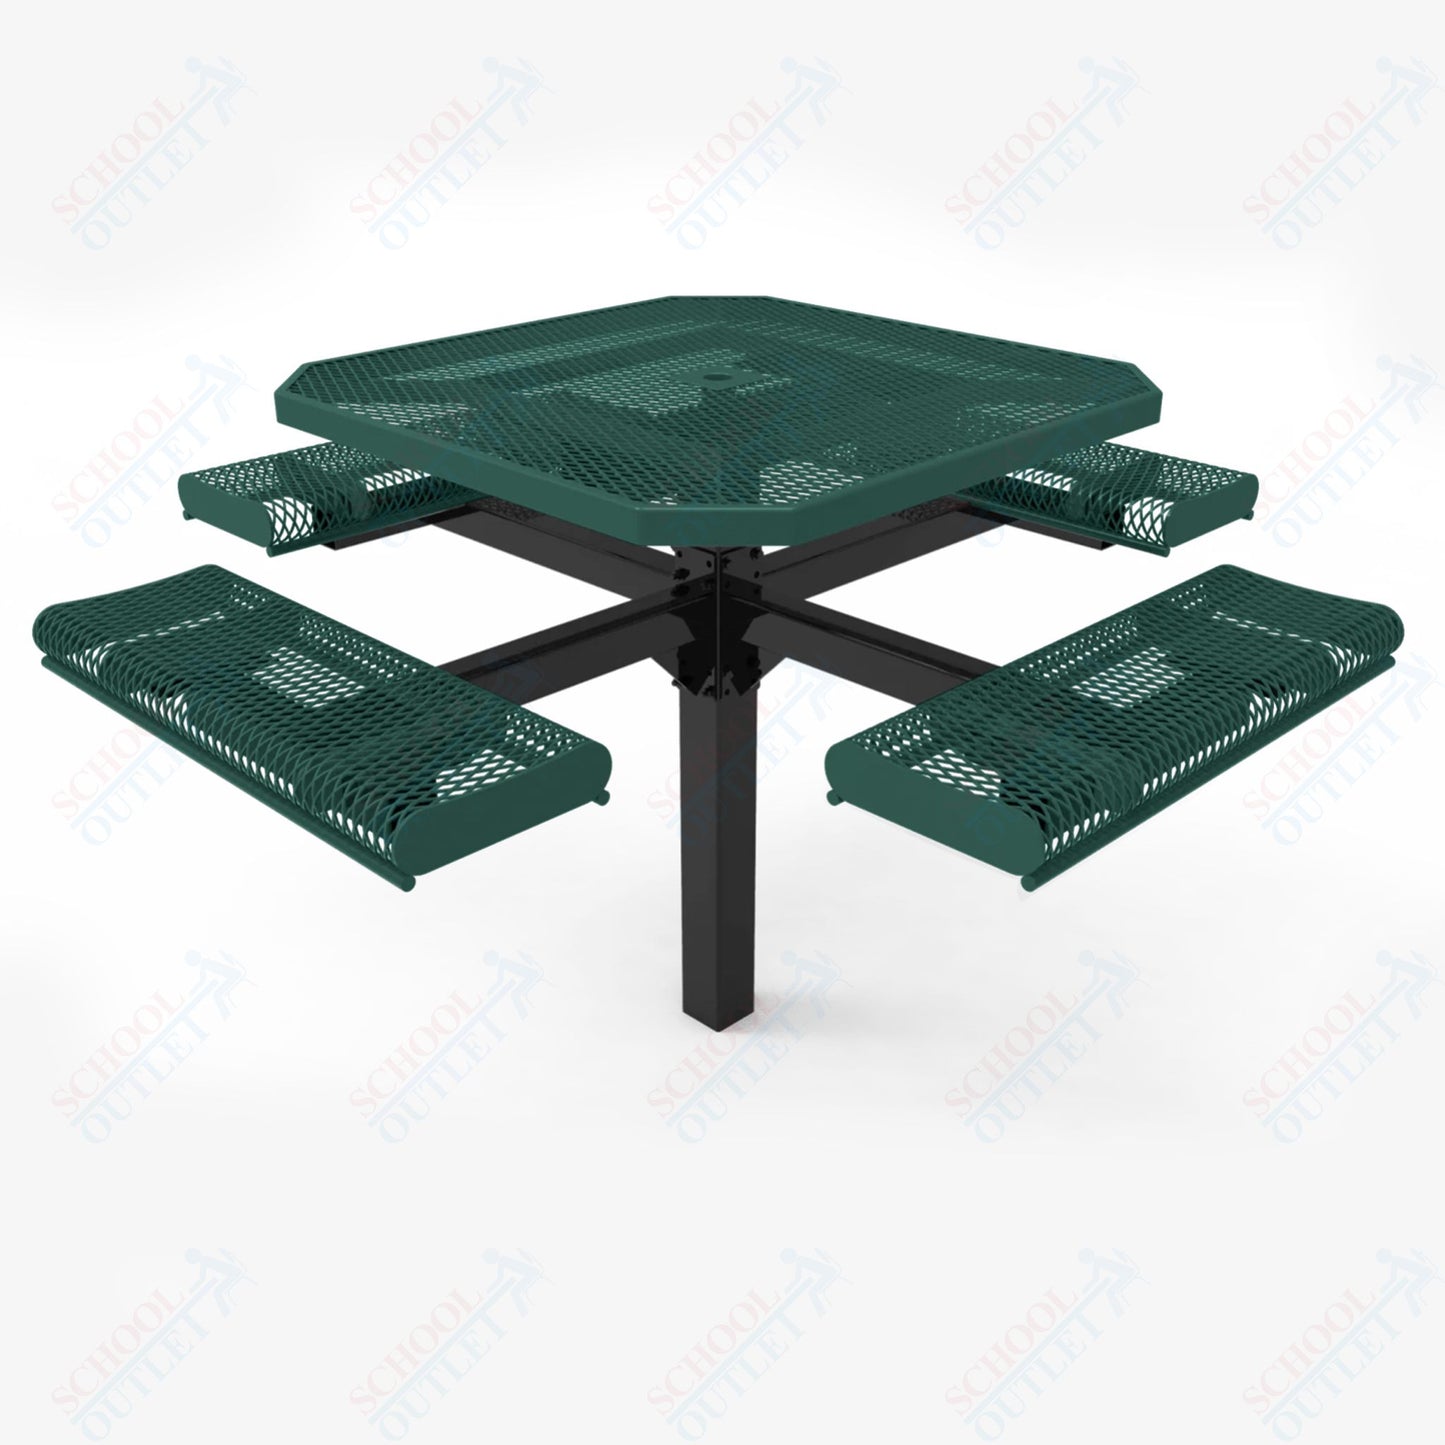 MyTcoat MYT-TOR46-12 46" Octagon Pedestal Picnic Table with Rolled Seats and Inground Mount (80.50"W x 80.50"D x 30"H)